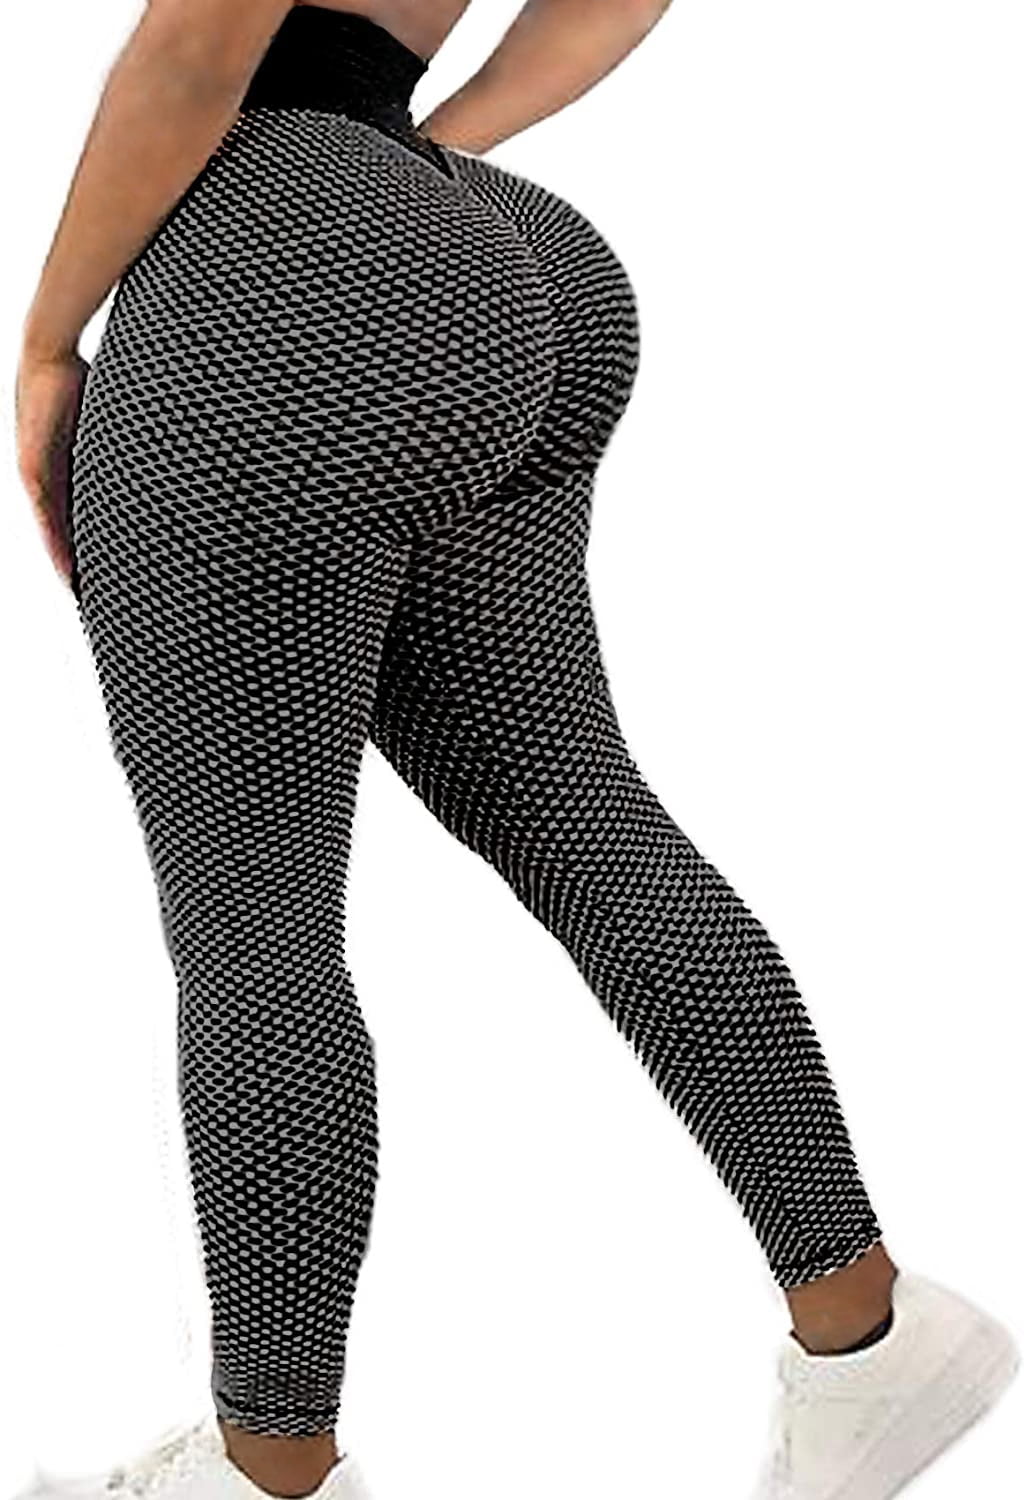 Coconut Palm Flamingo 3D Printed Cozy Lularoe Leggings For Women High Waist  Casual And Sexy Legging With DHL From A012991, $64.45